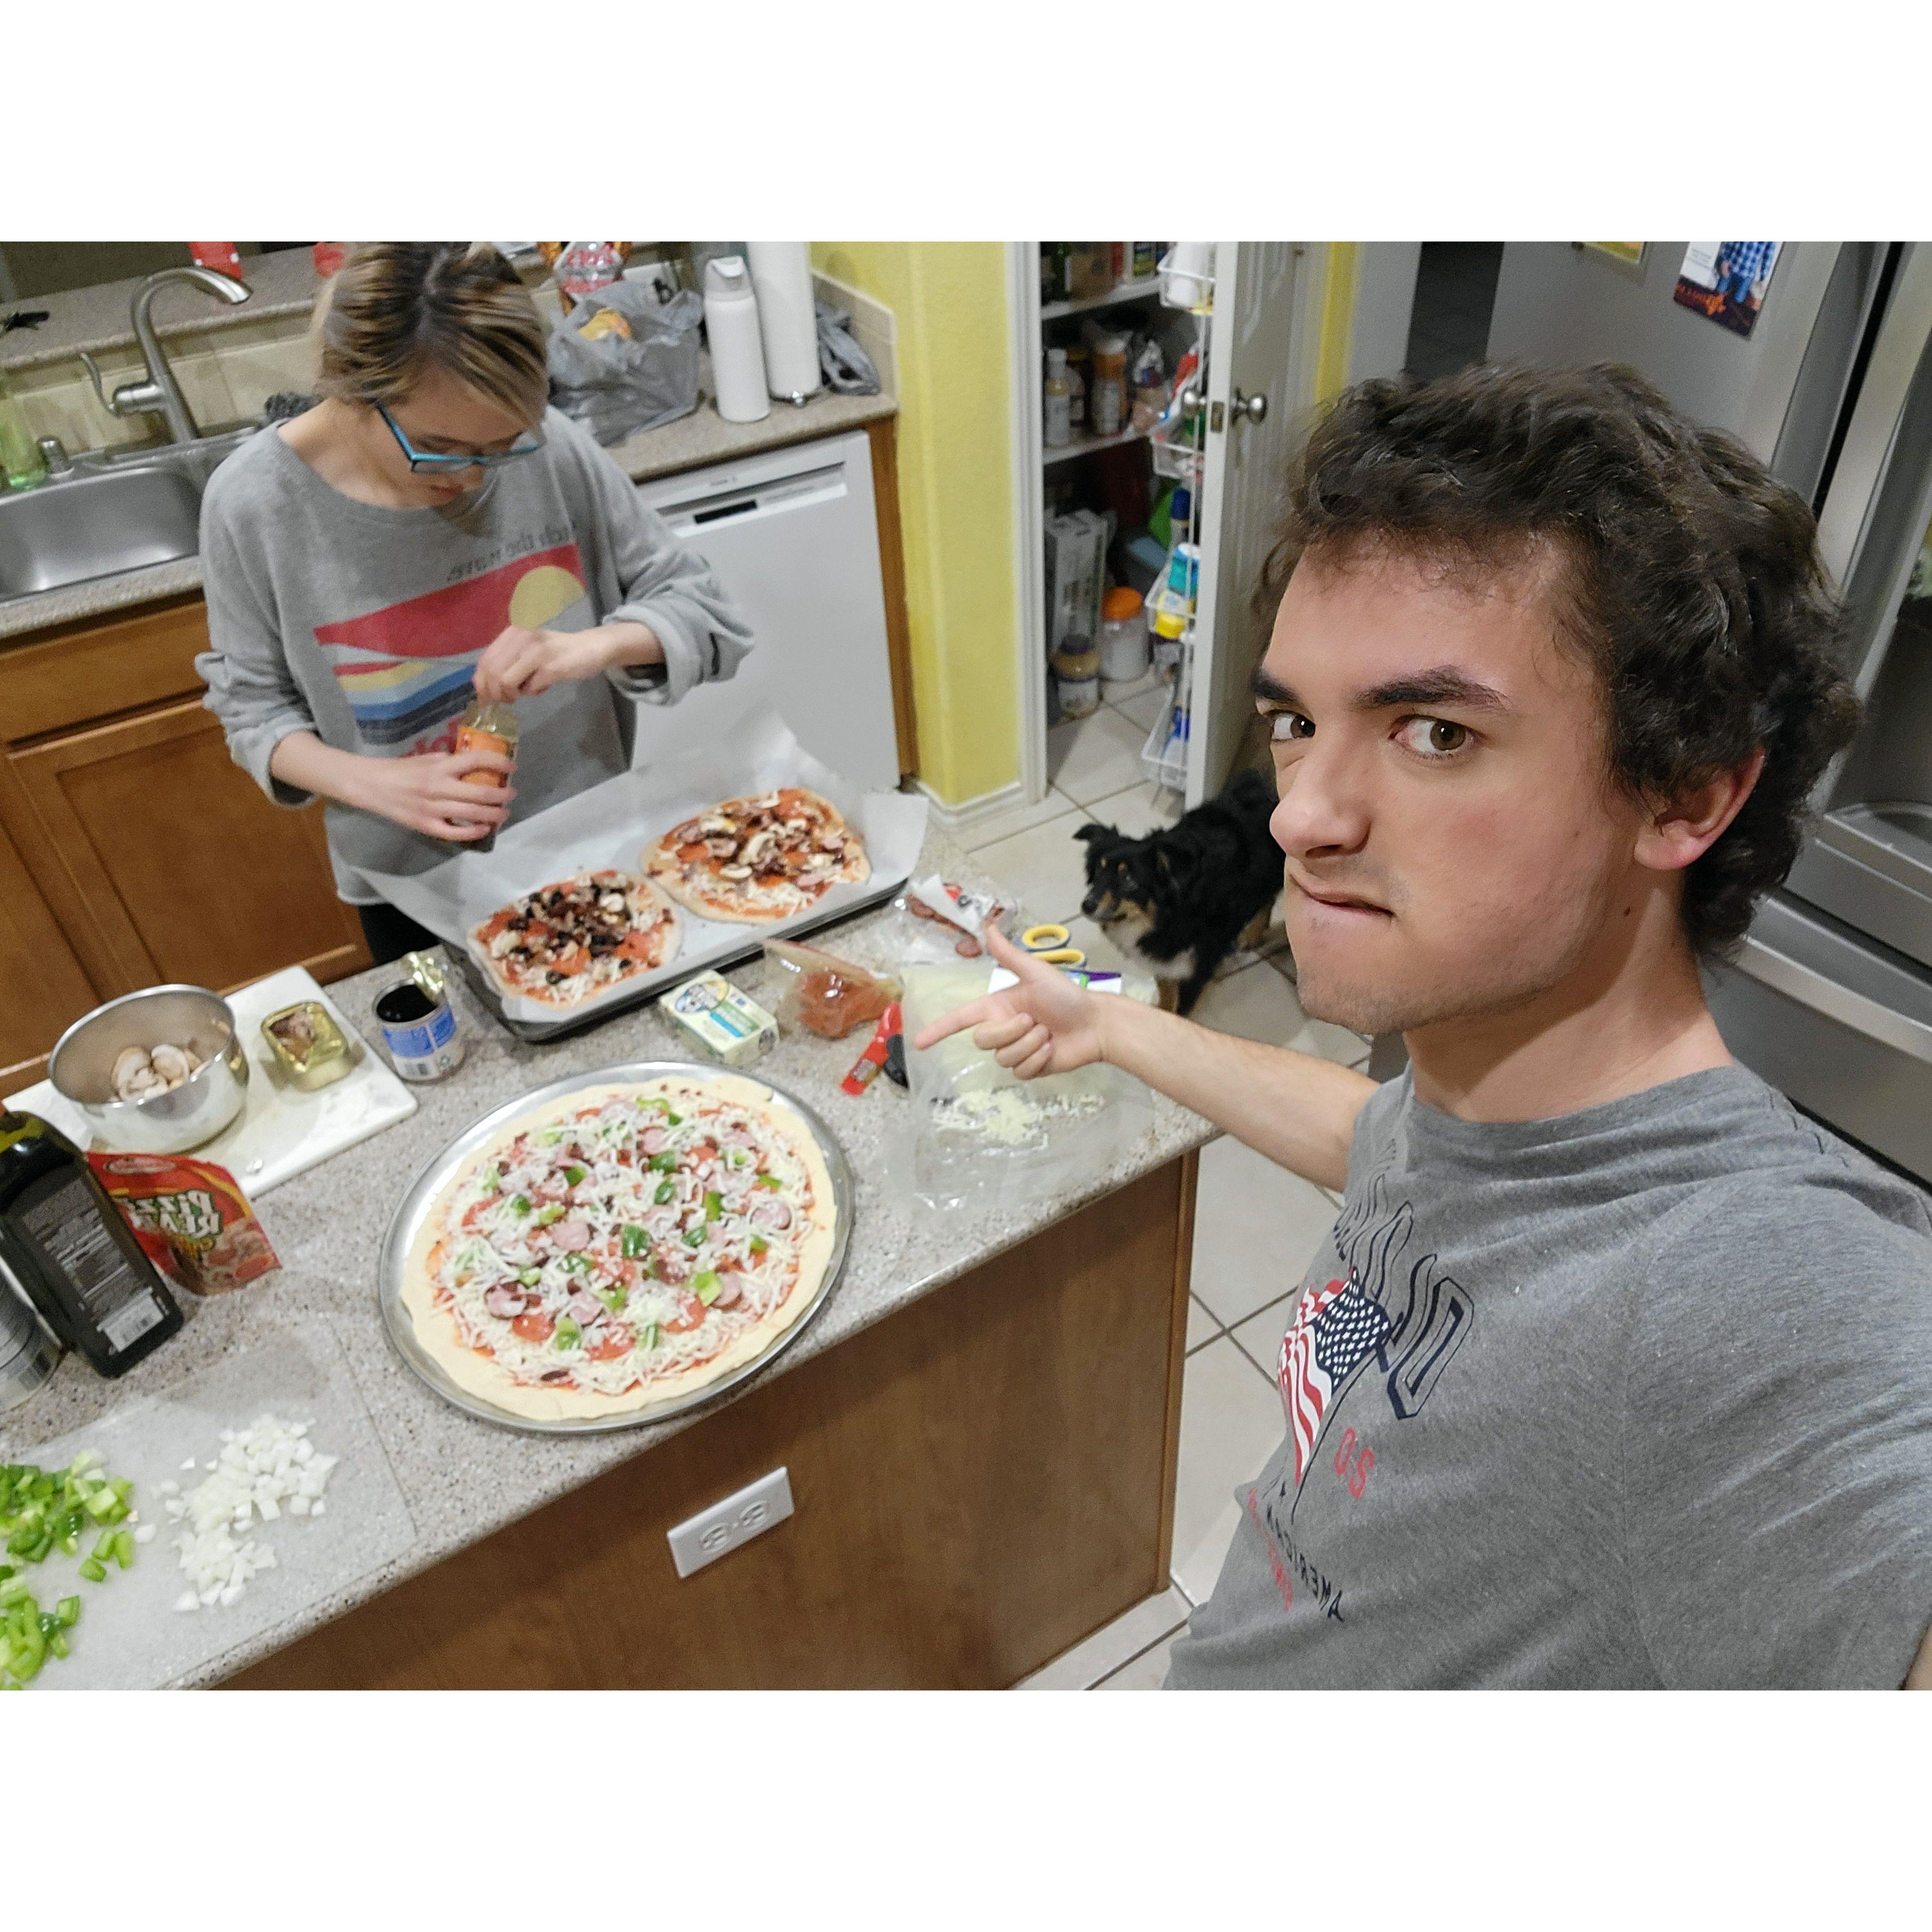 Second year of NYE pizzas